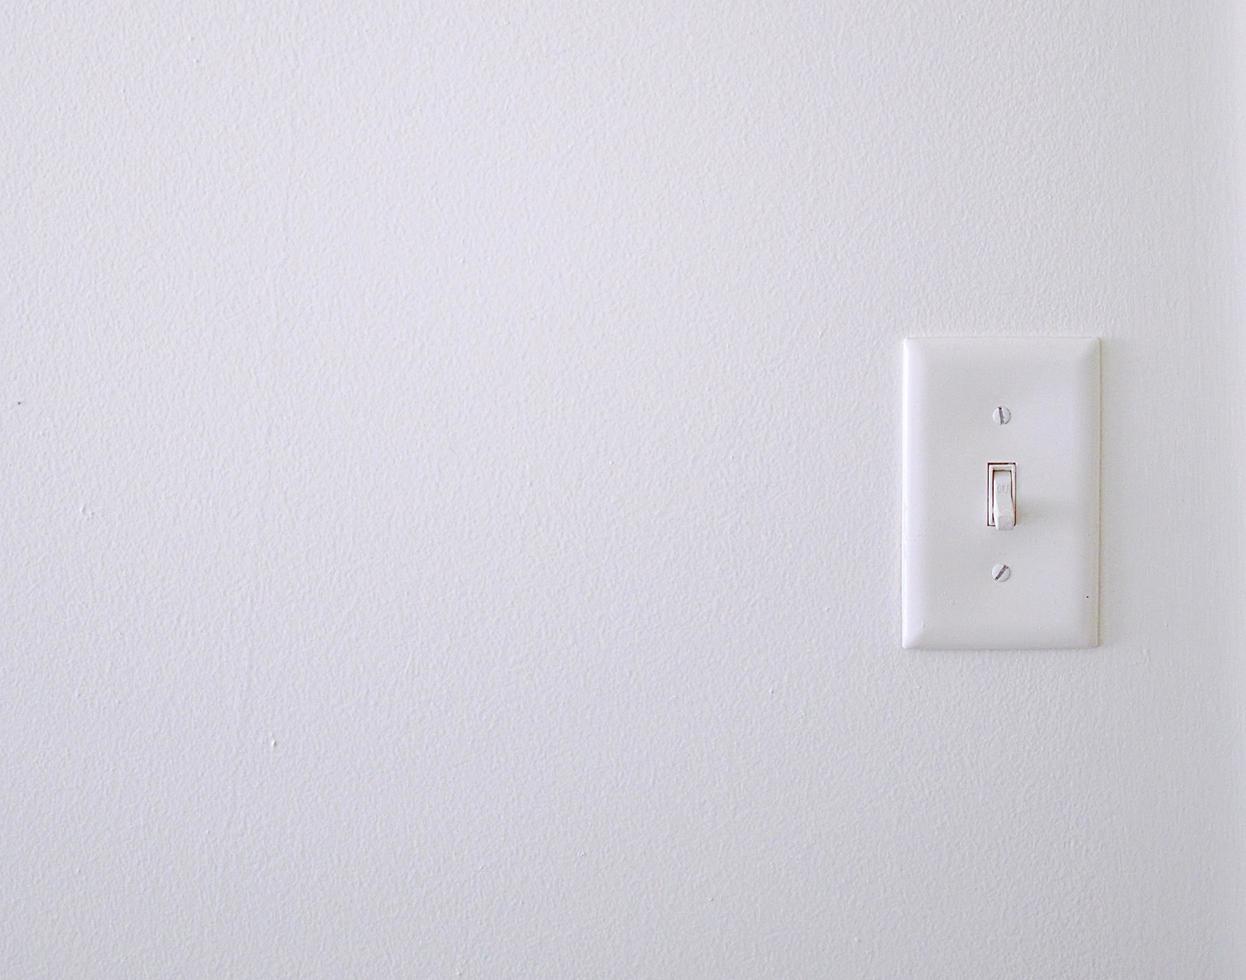 White wall with a light switch photo